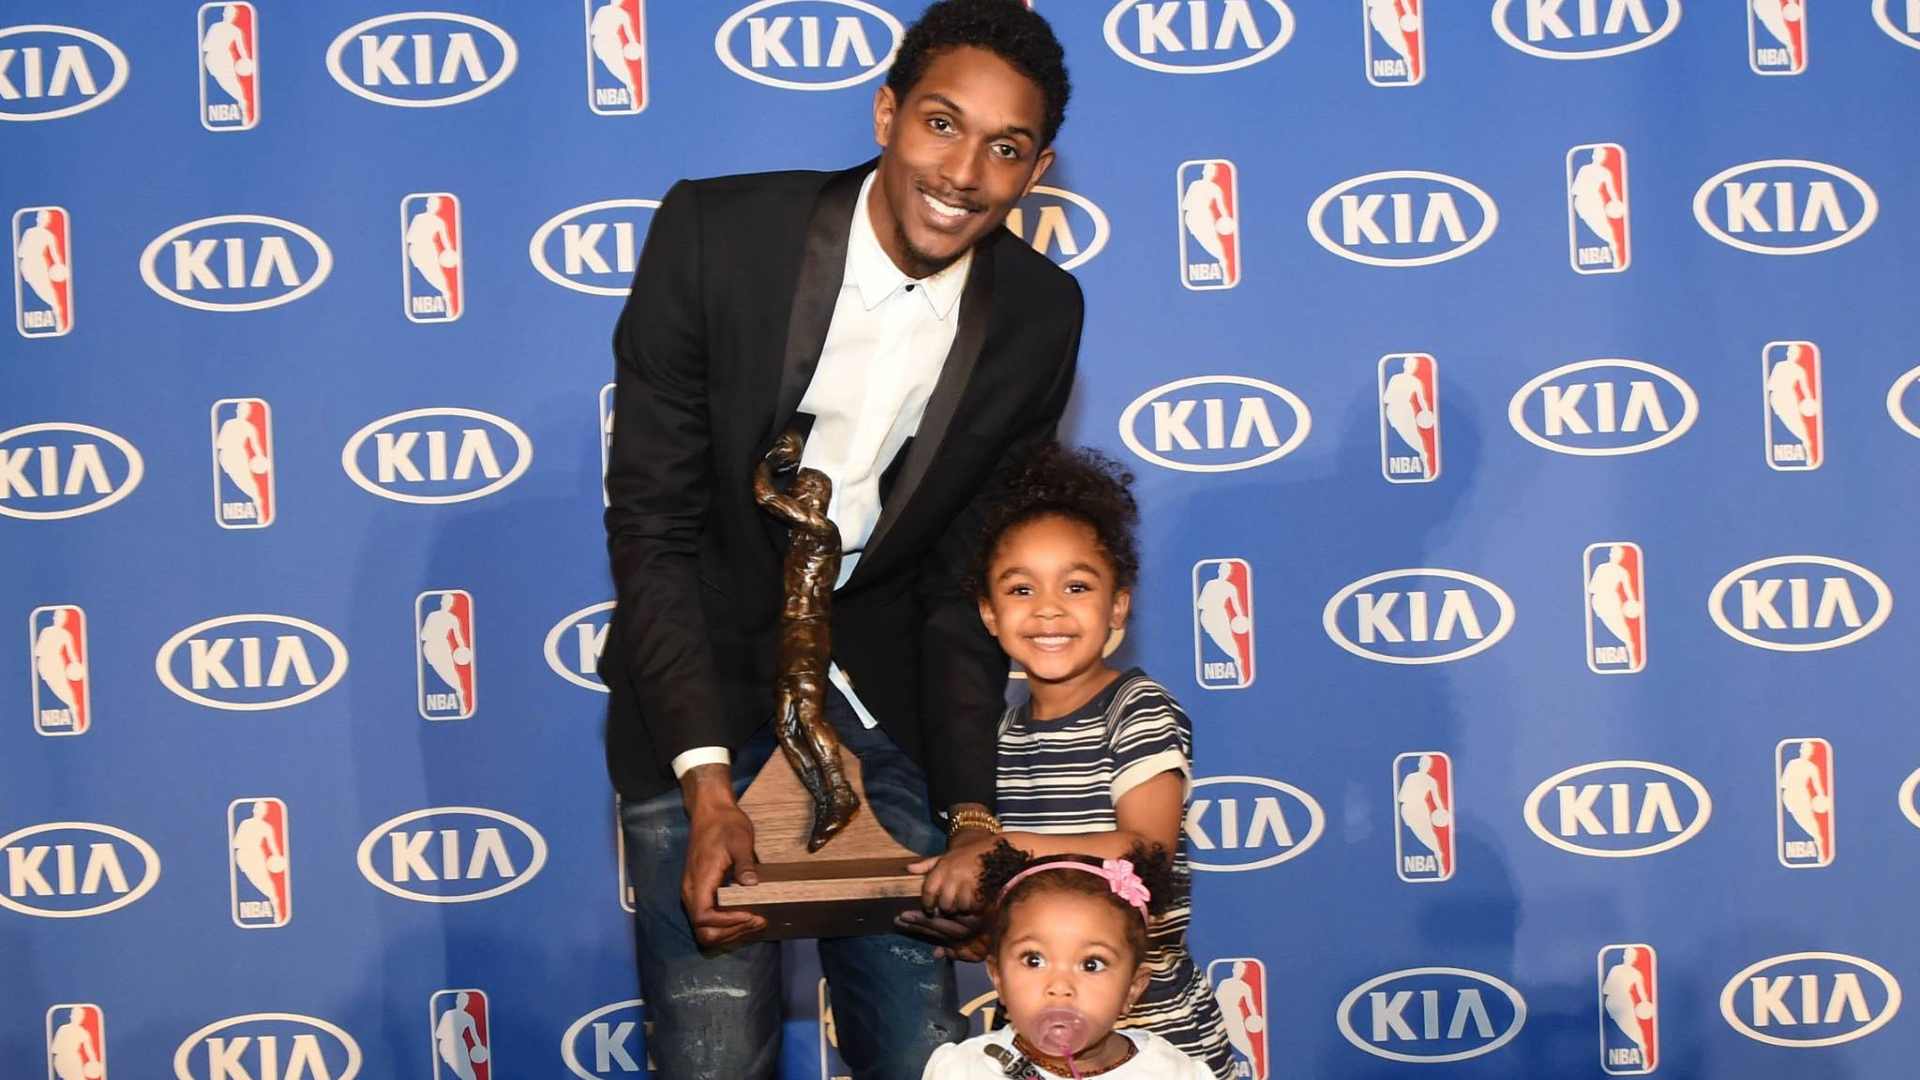 Lou Williams with his daughters, Image credit: Facebook